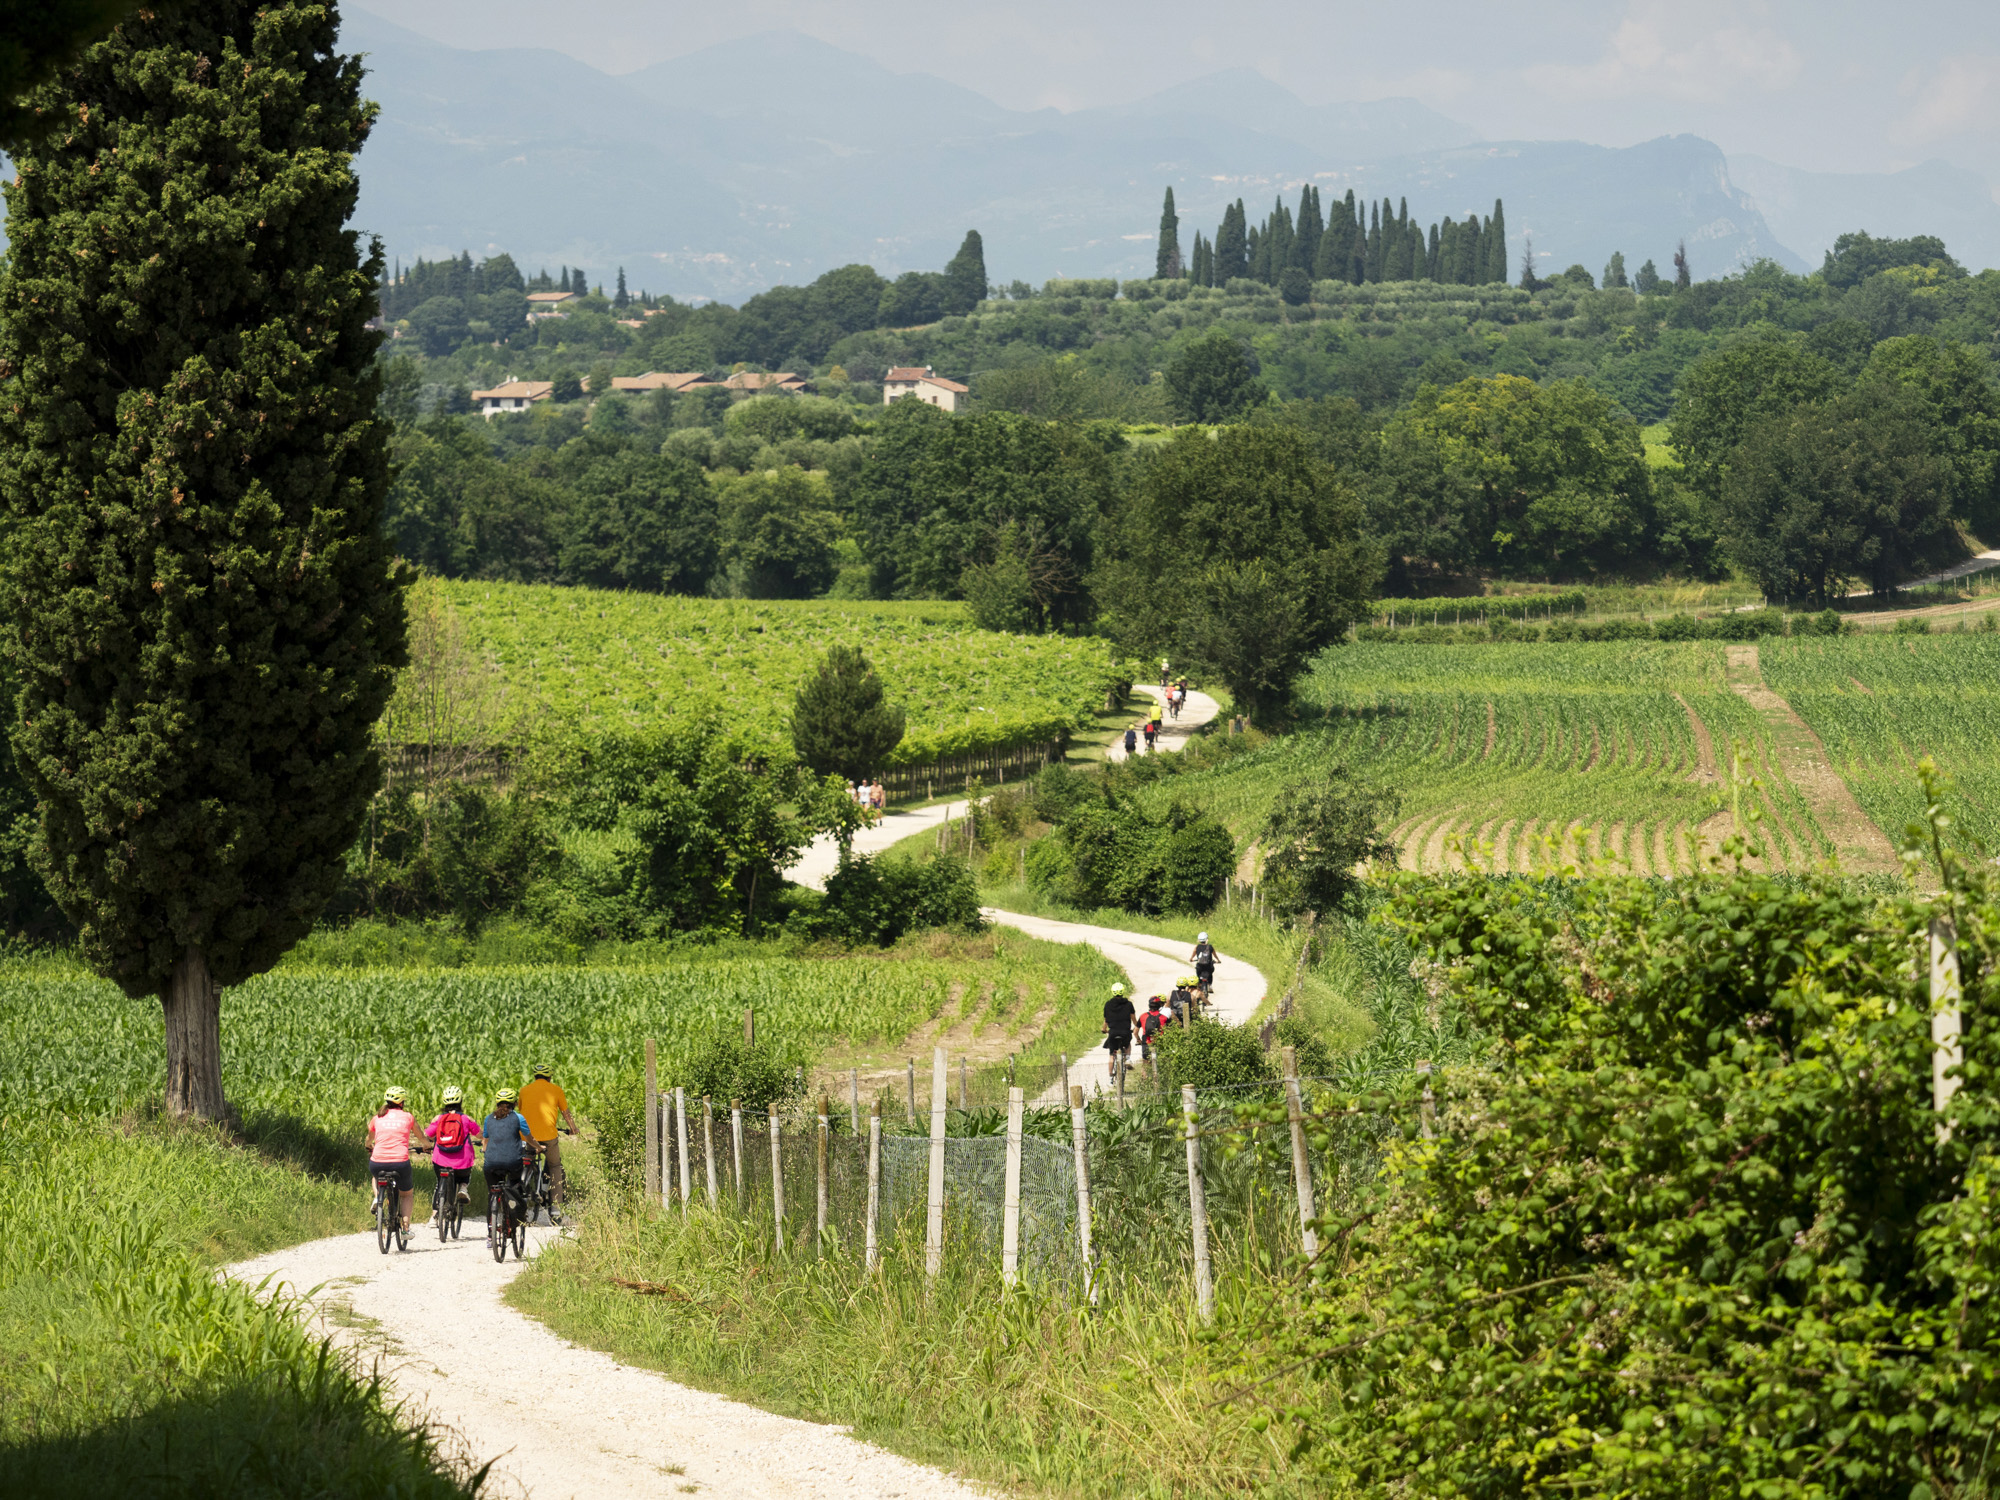 Verona and its vineyards by bike or on horseback: taste wines and live exciting adventures through a different route